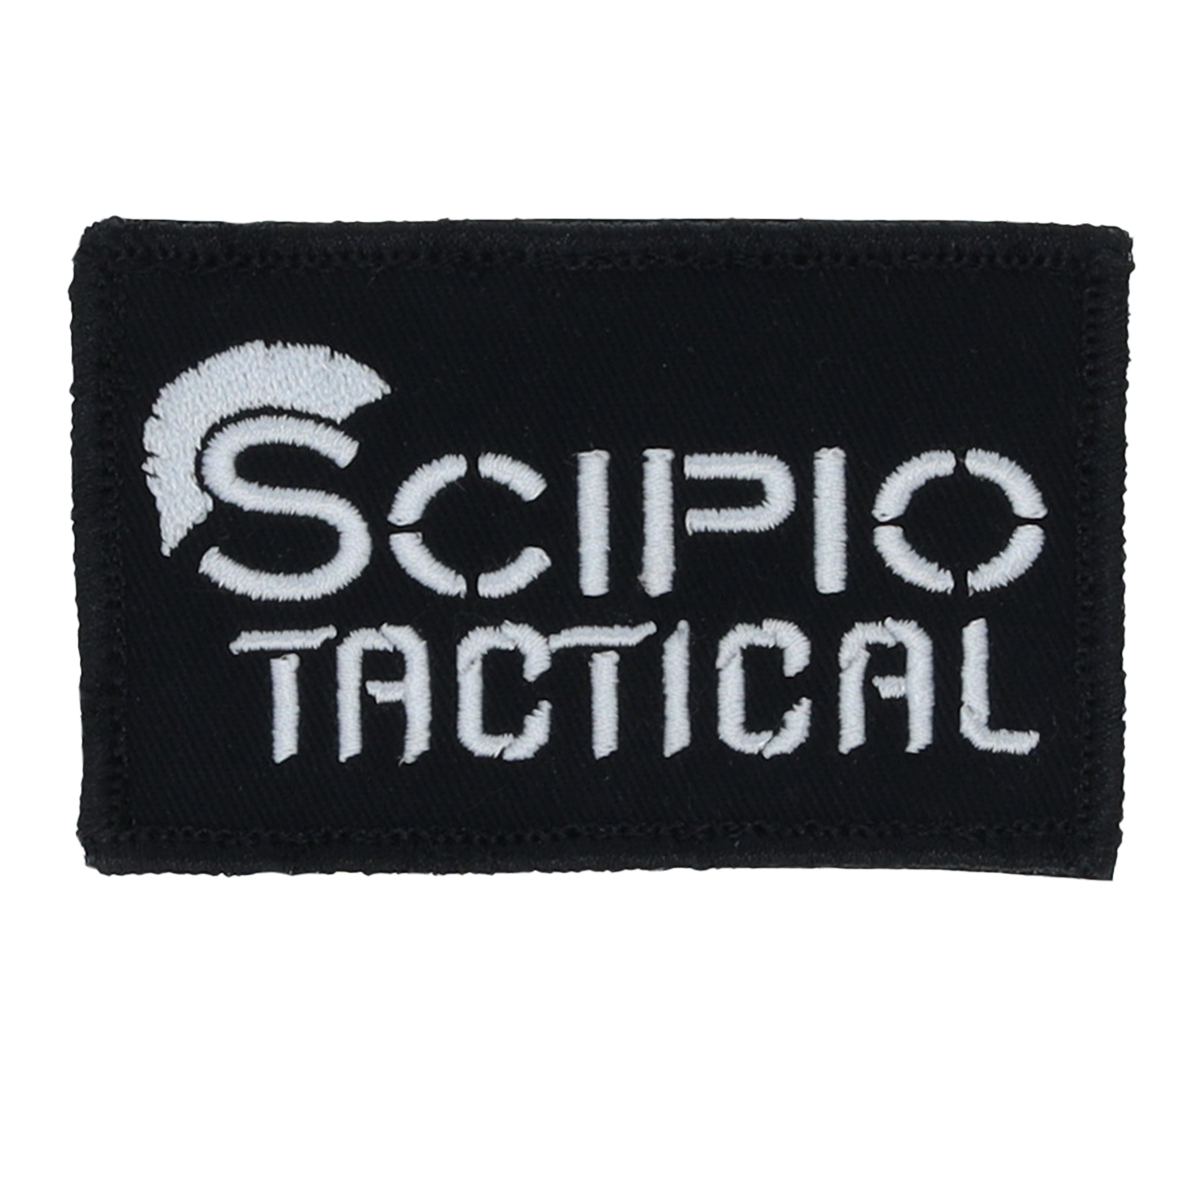 Scipio Tactical Morale Patch SCTACPCH  - Military Style Patch for Hats and Backpacks - Law Enforcement Patches Spartan Style - B